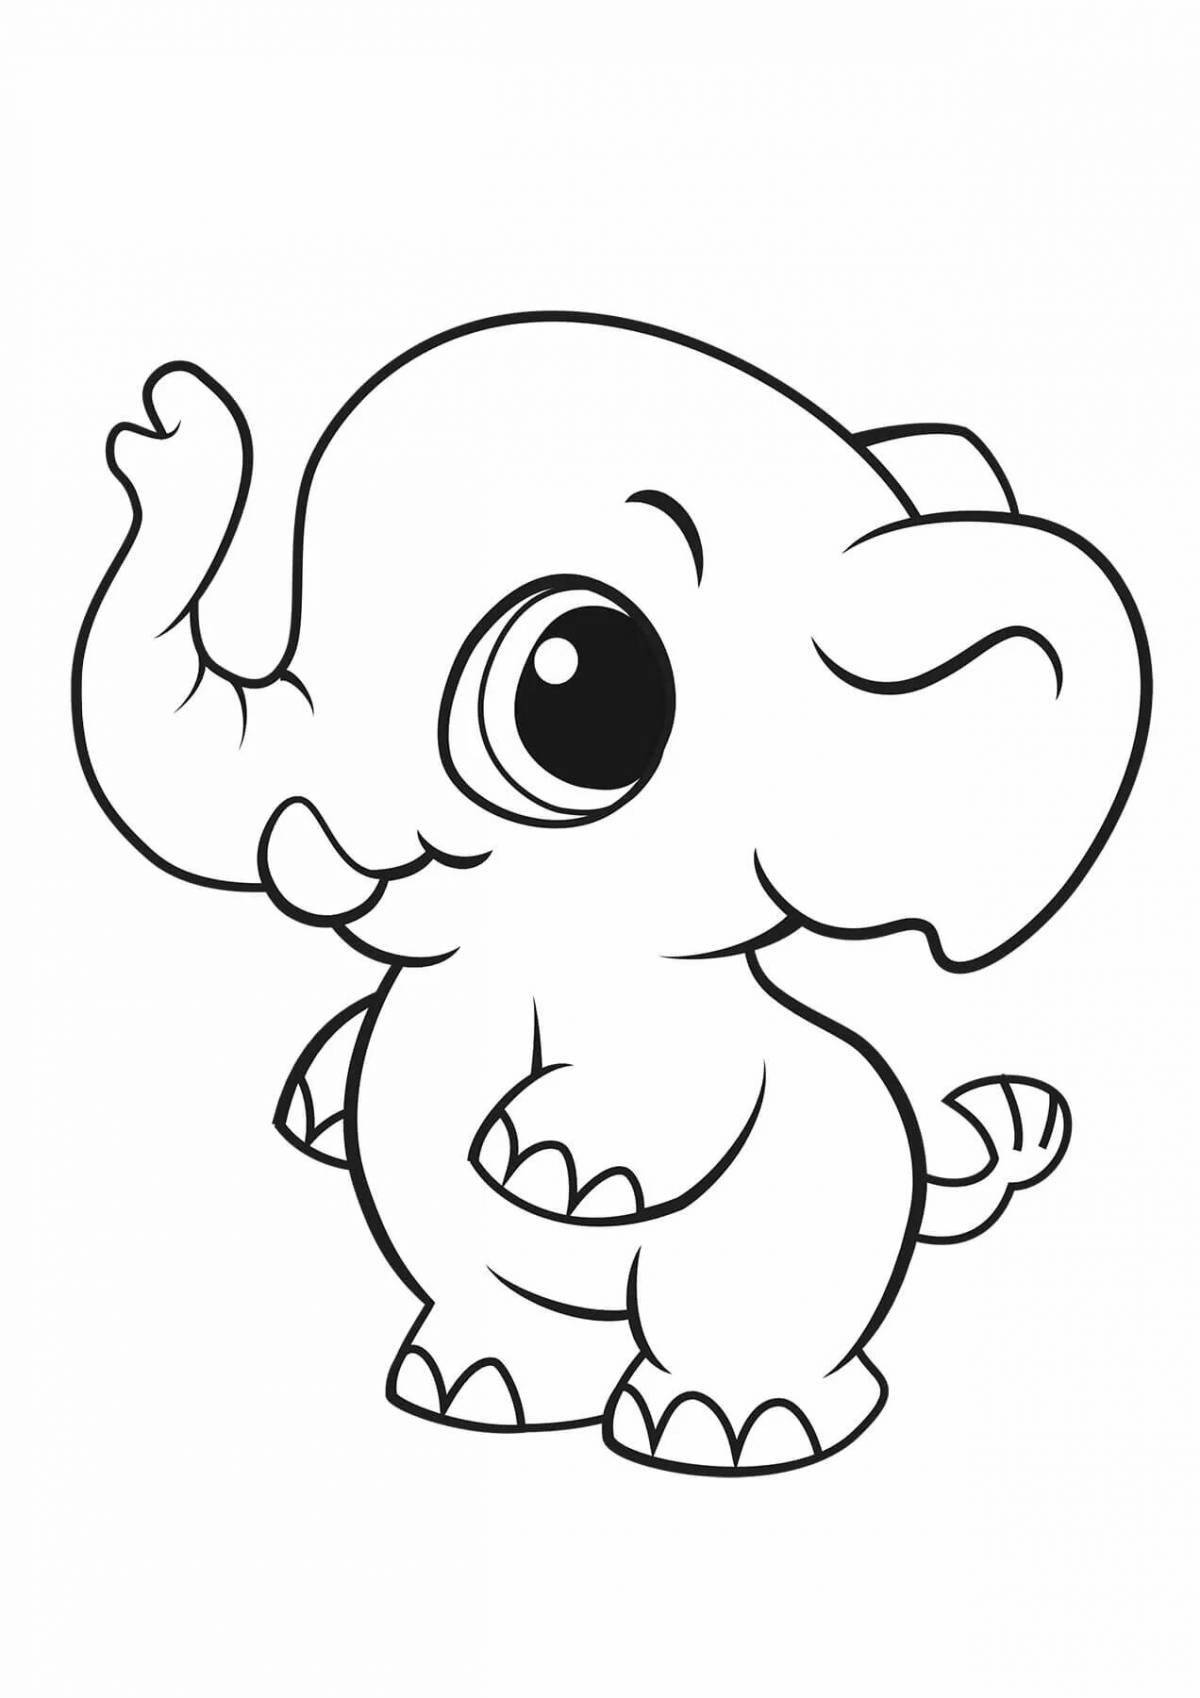 Tempting animal coloring pages